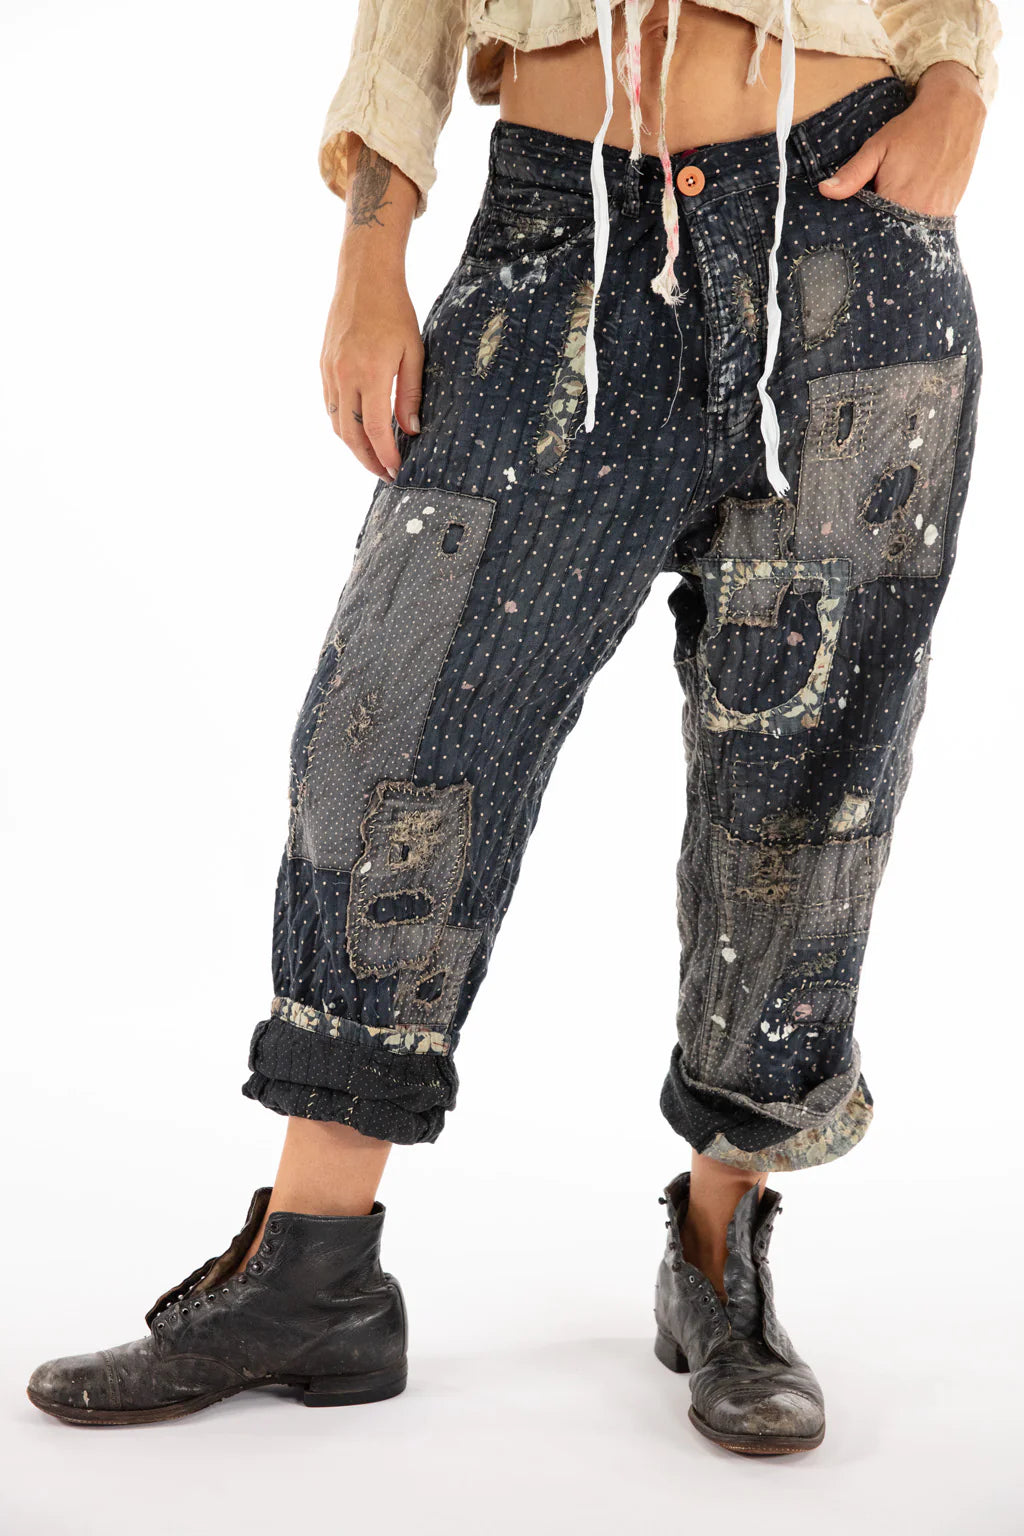 Magnolia Pearl PANTS 495-COSSE-OS  Dot and Floral Miners Pants